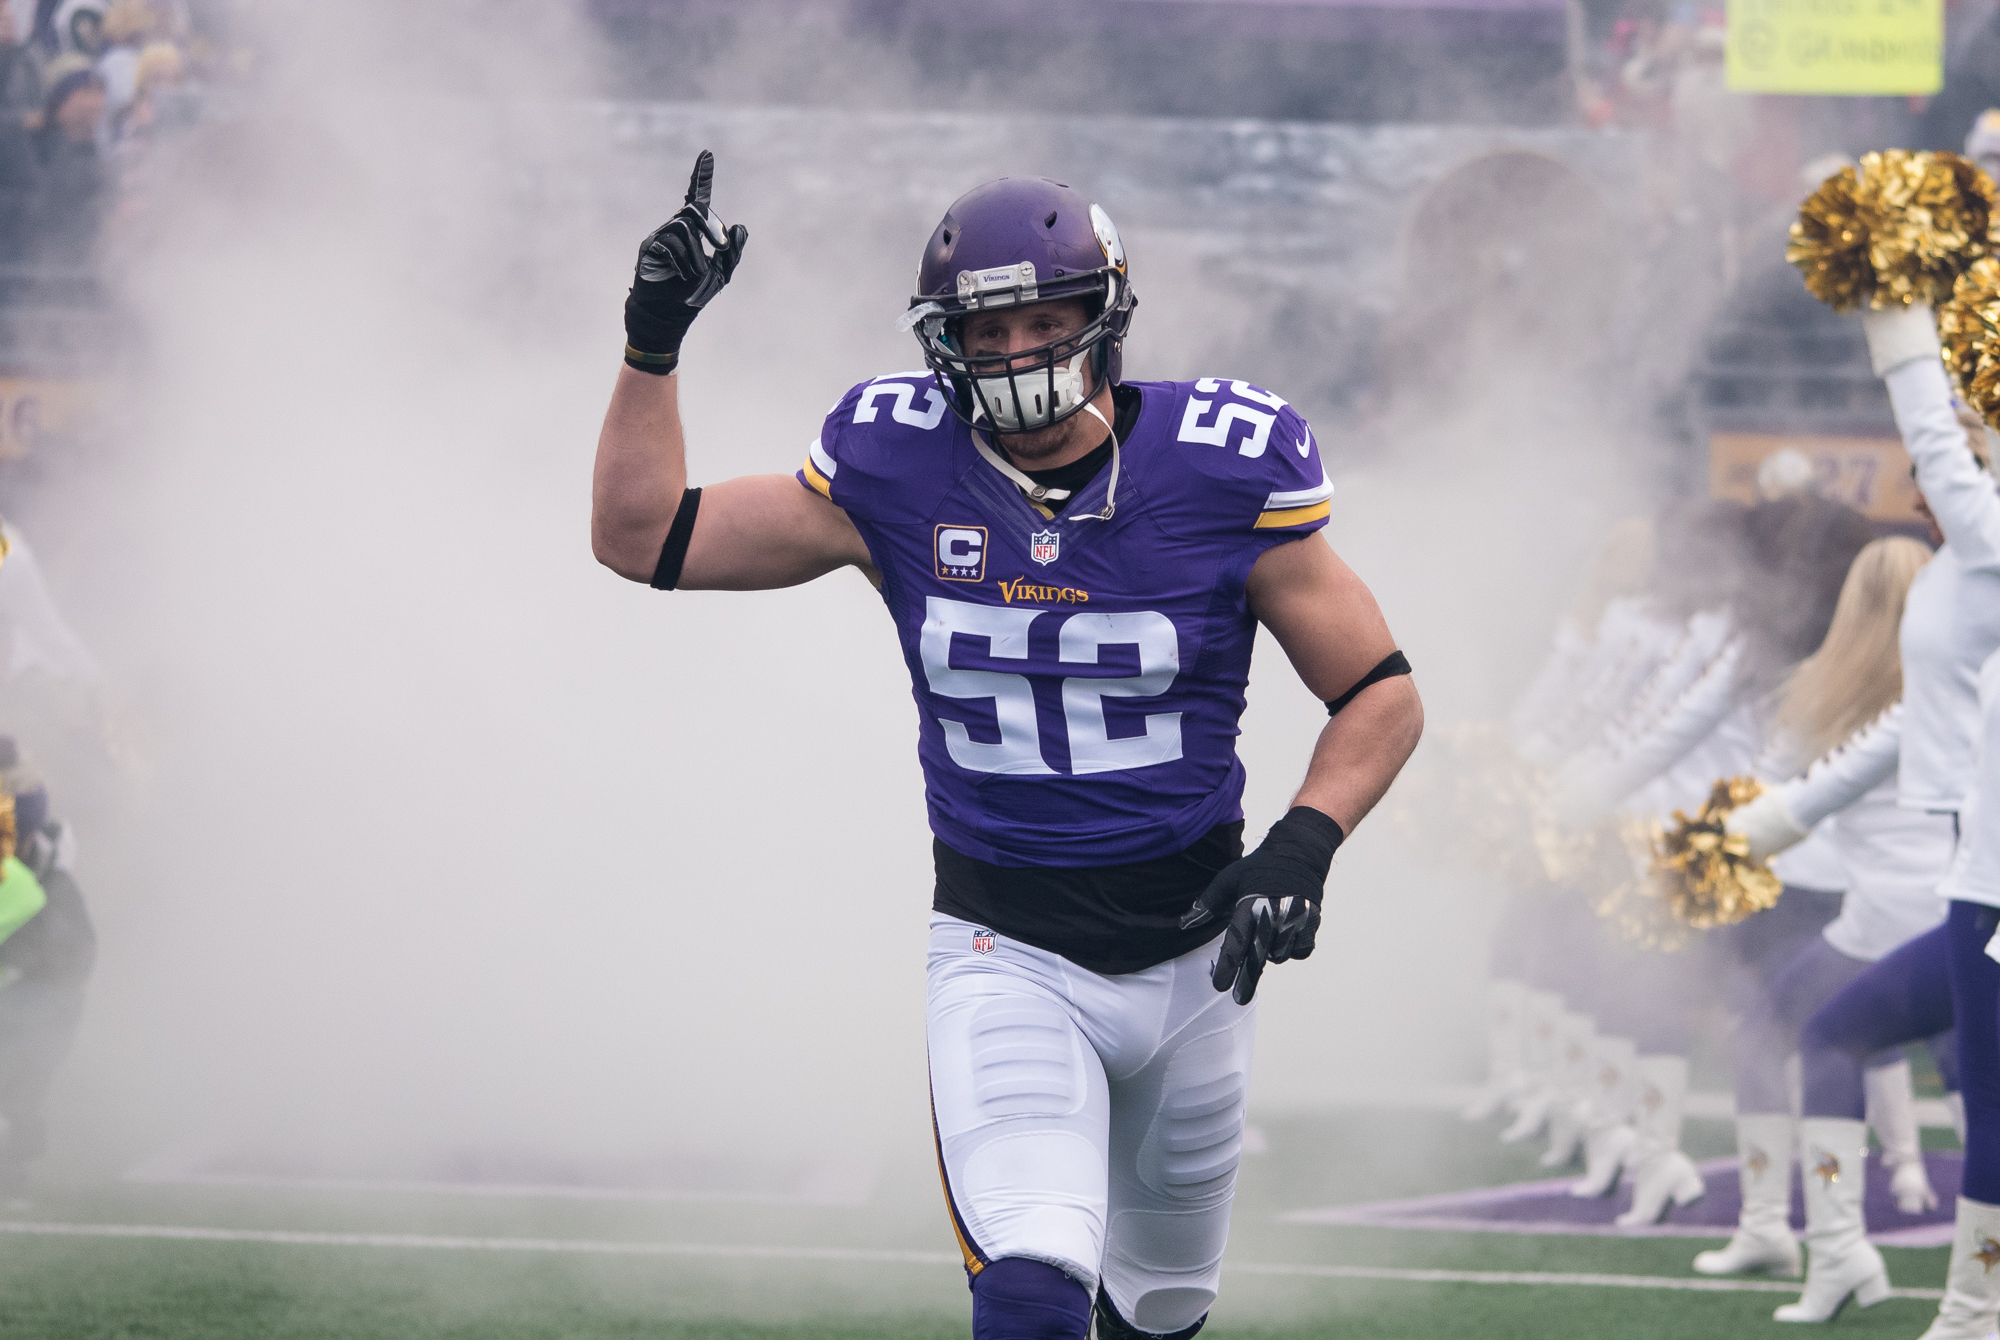 EKSTROM: Chad Greenway’s Midwestern Roots Shaped His Football-Playing Legacy